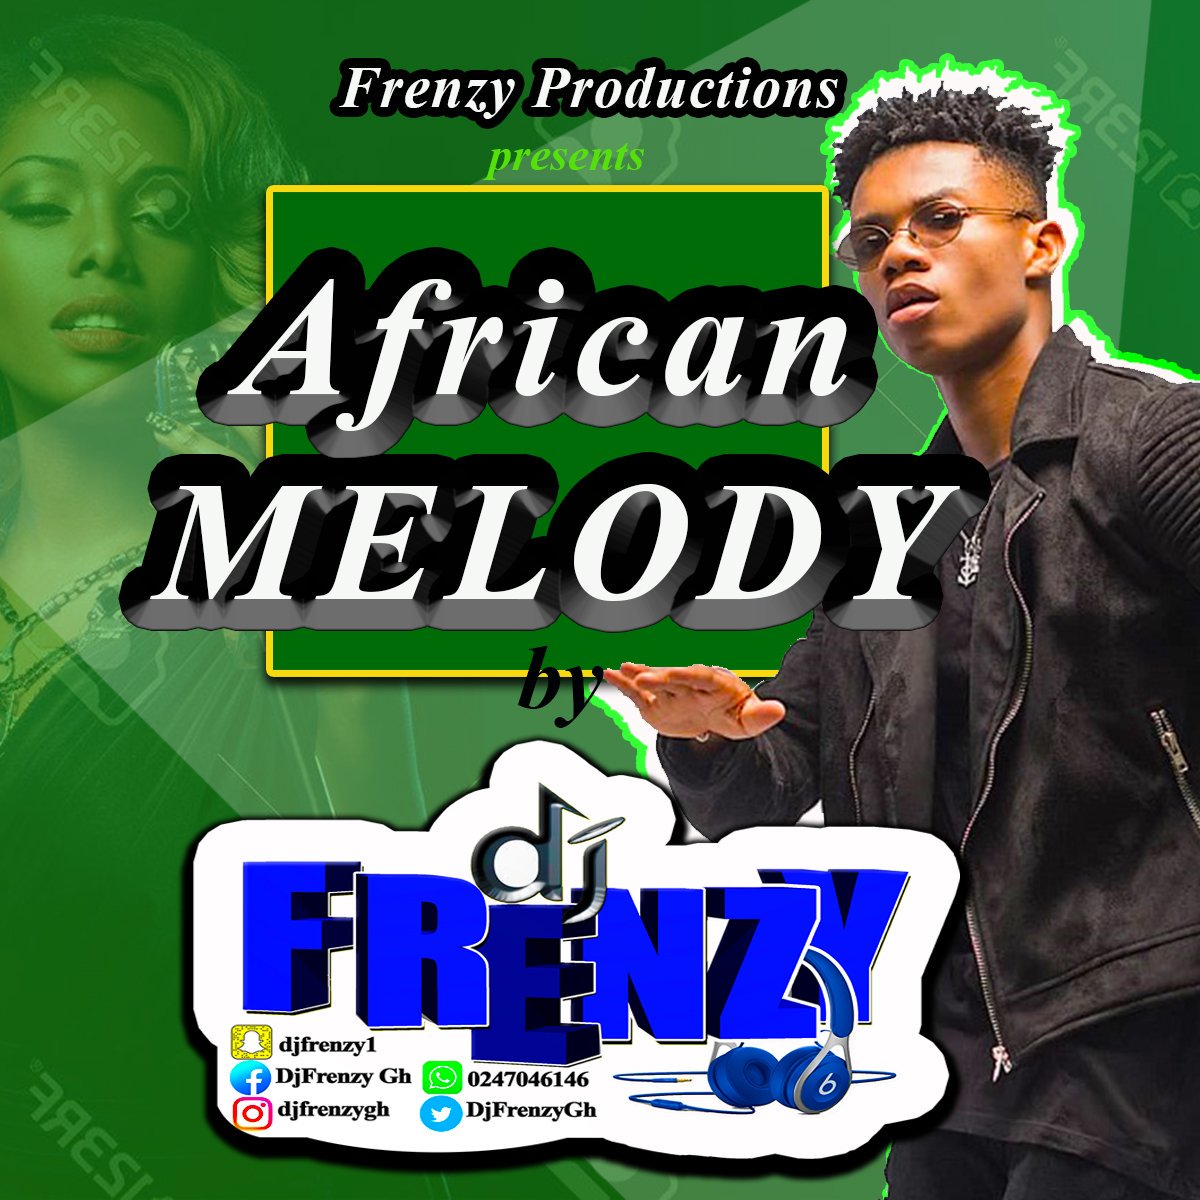 Blended African Music for your Listening Pleasure. #AfricanMelody
#Already trending